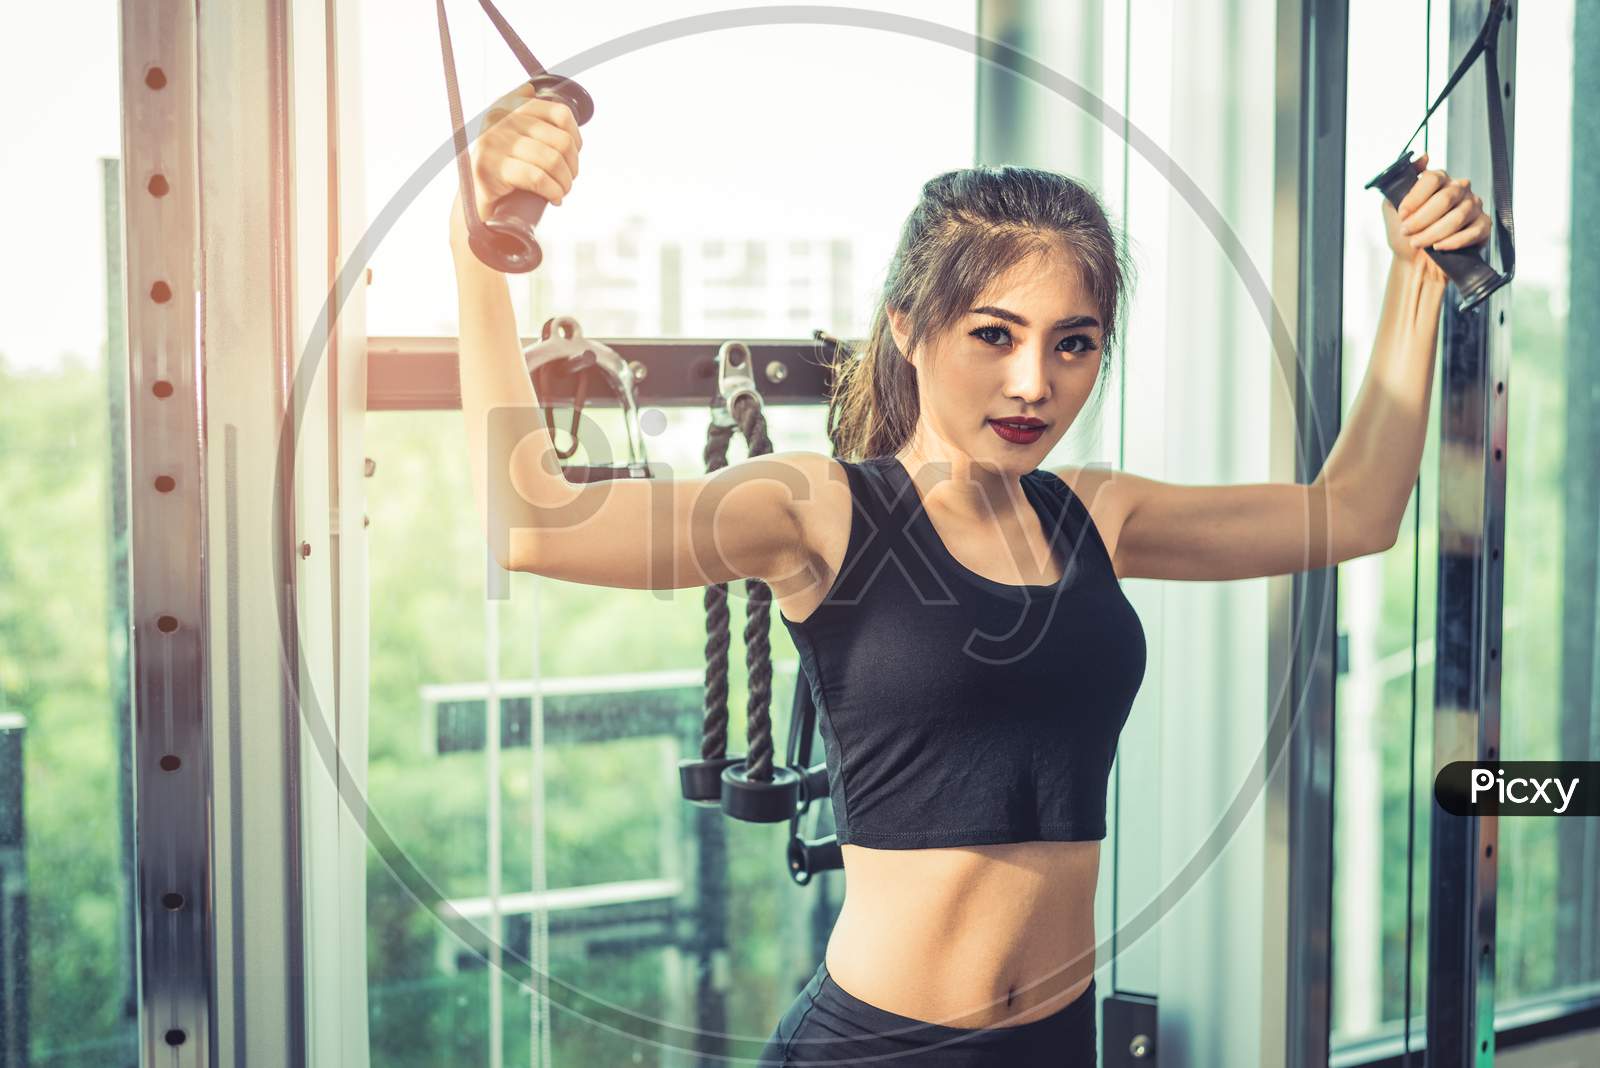 Asian Young Woman Doing Elastic Rope Exercises At Cross Fitness Gym. Strength Training And Muscular Beauty And Healthy Concept. Sport Equipment And Sport Club Center Theme.